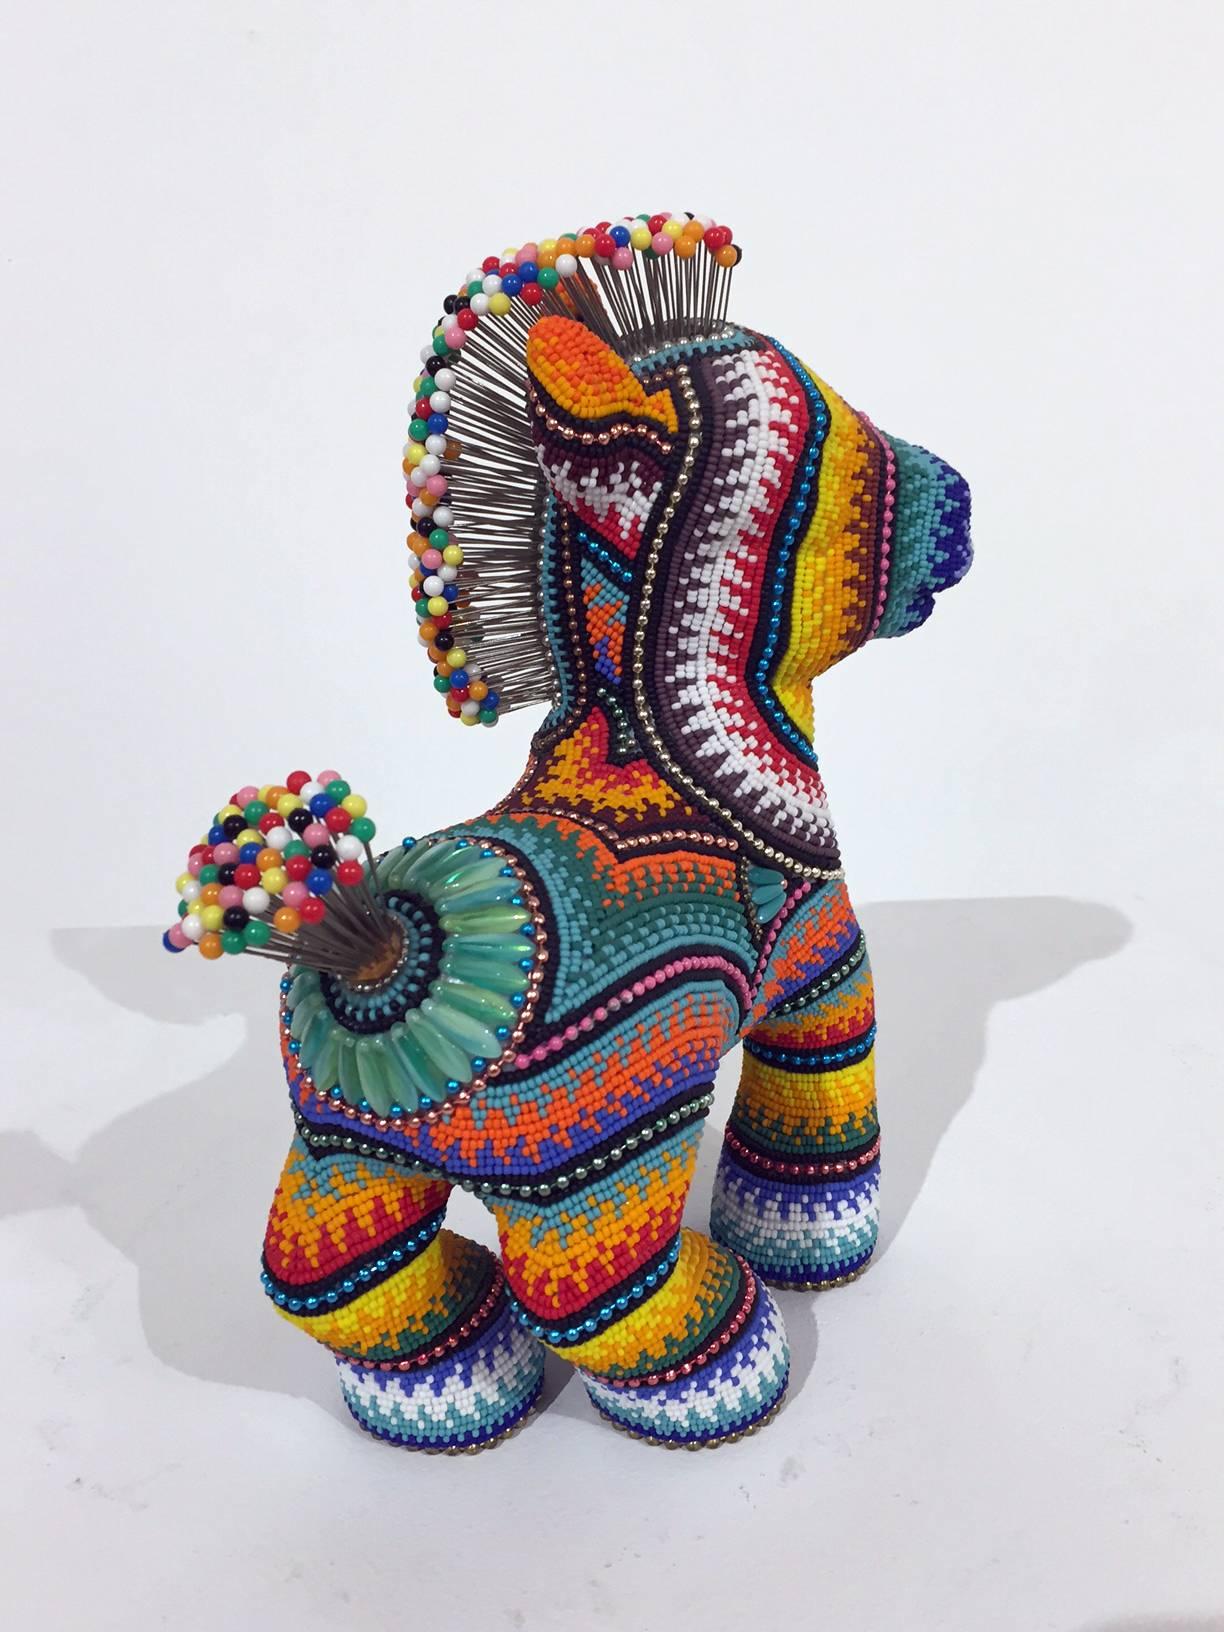 Pony by Jan Huling, Brightly Colored and Patterned Beaded Sculpture  1